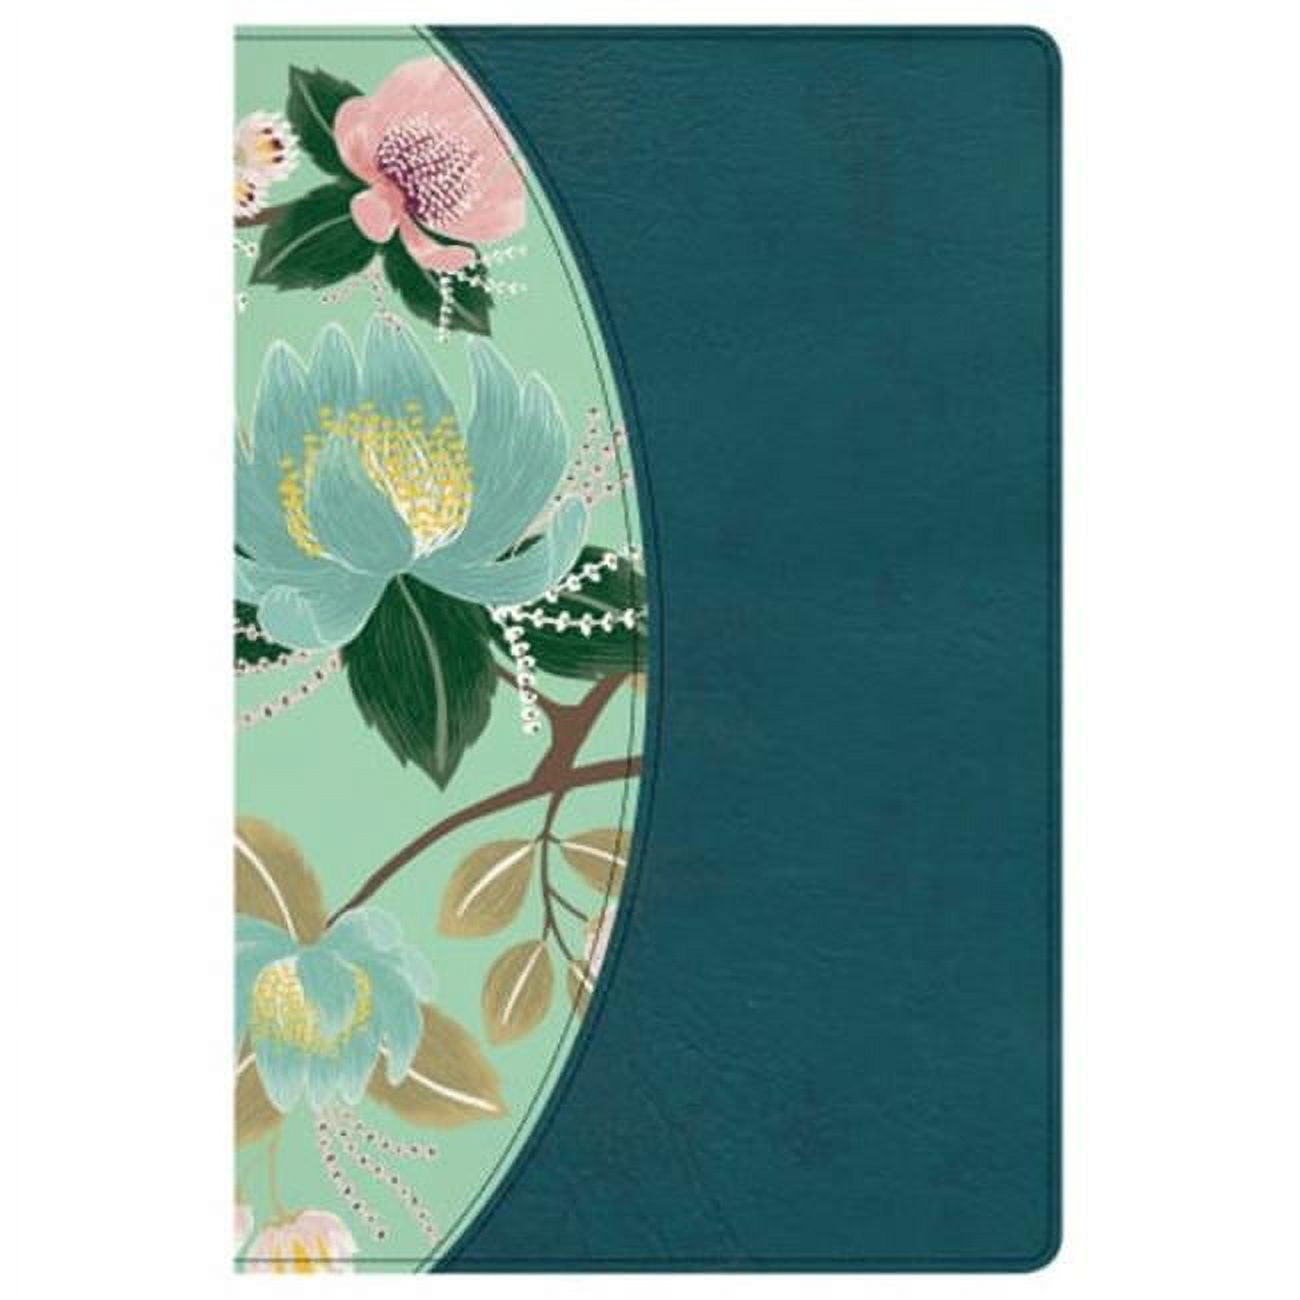 B & H Publishing 16015x Csb Study Bible For Women Leather Touch Indexed Cover, Teal